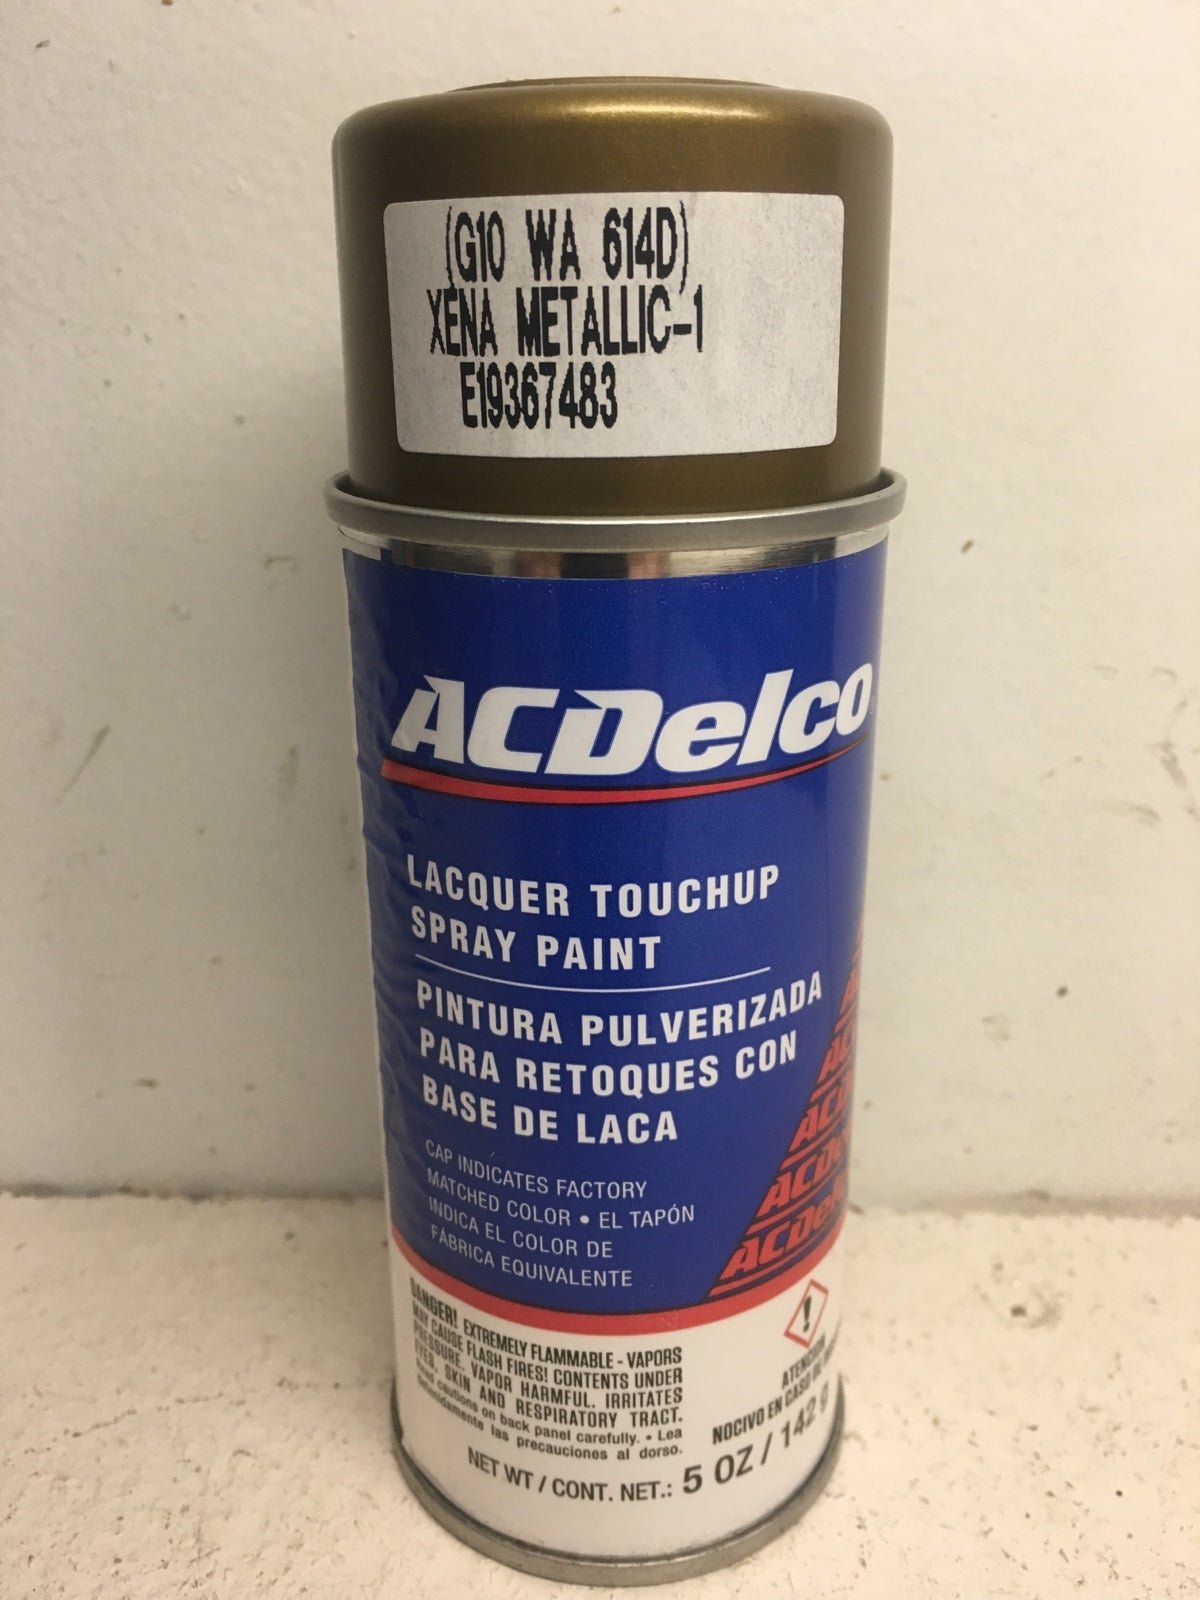 GM AC Delco lacquer touch up spray paint 5 oz HvpYEjNRy